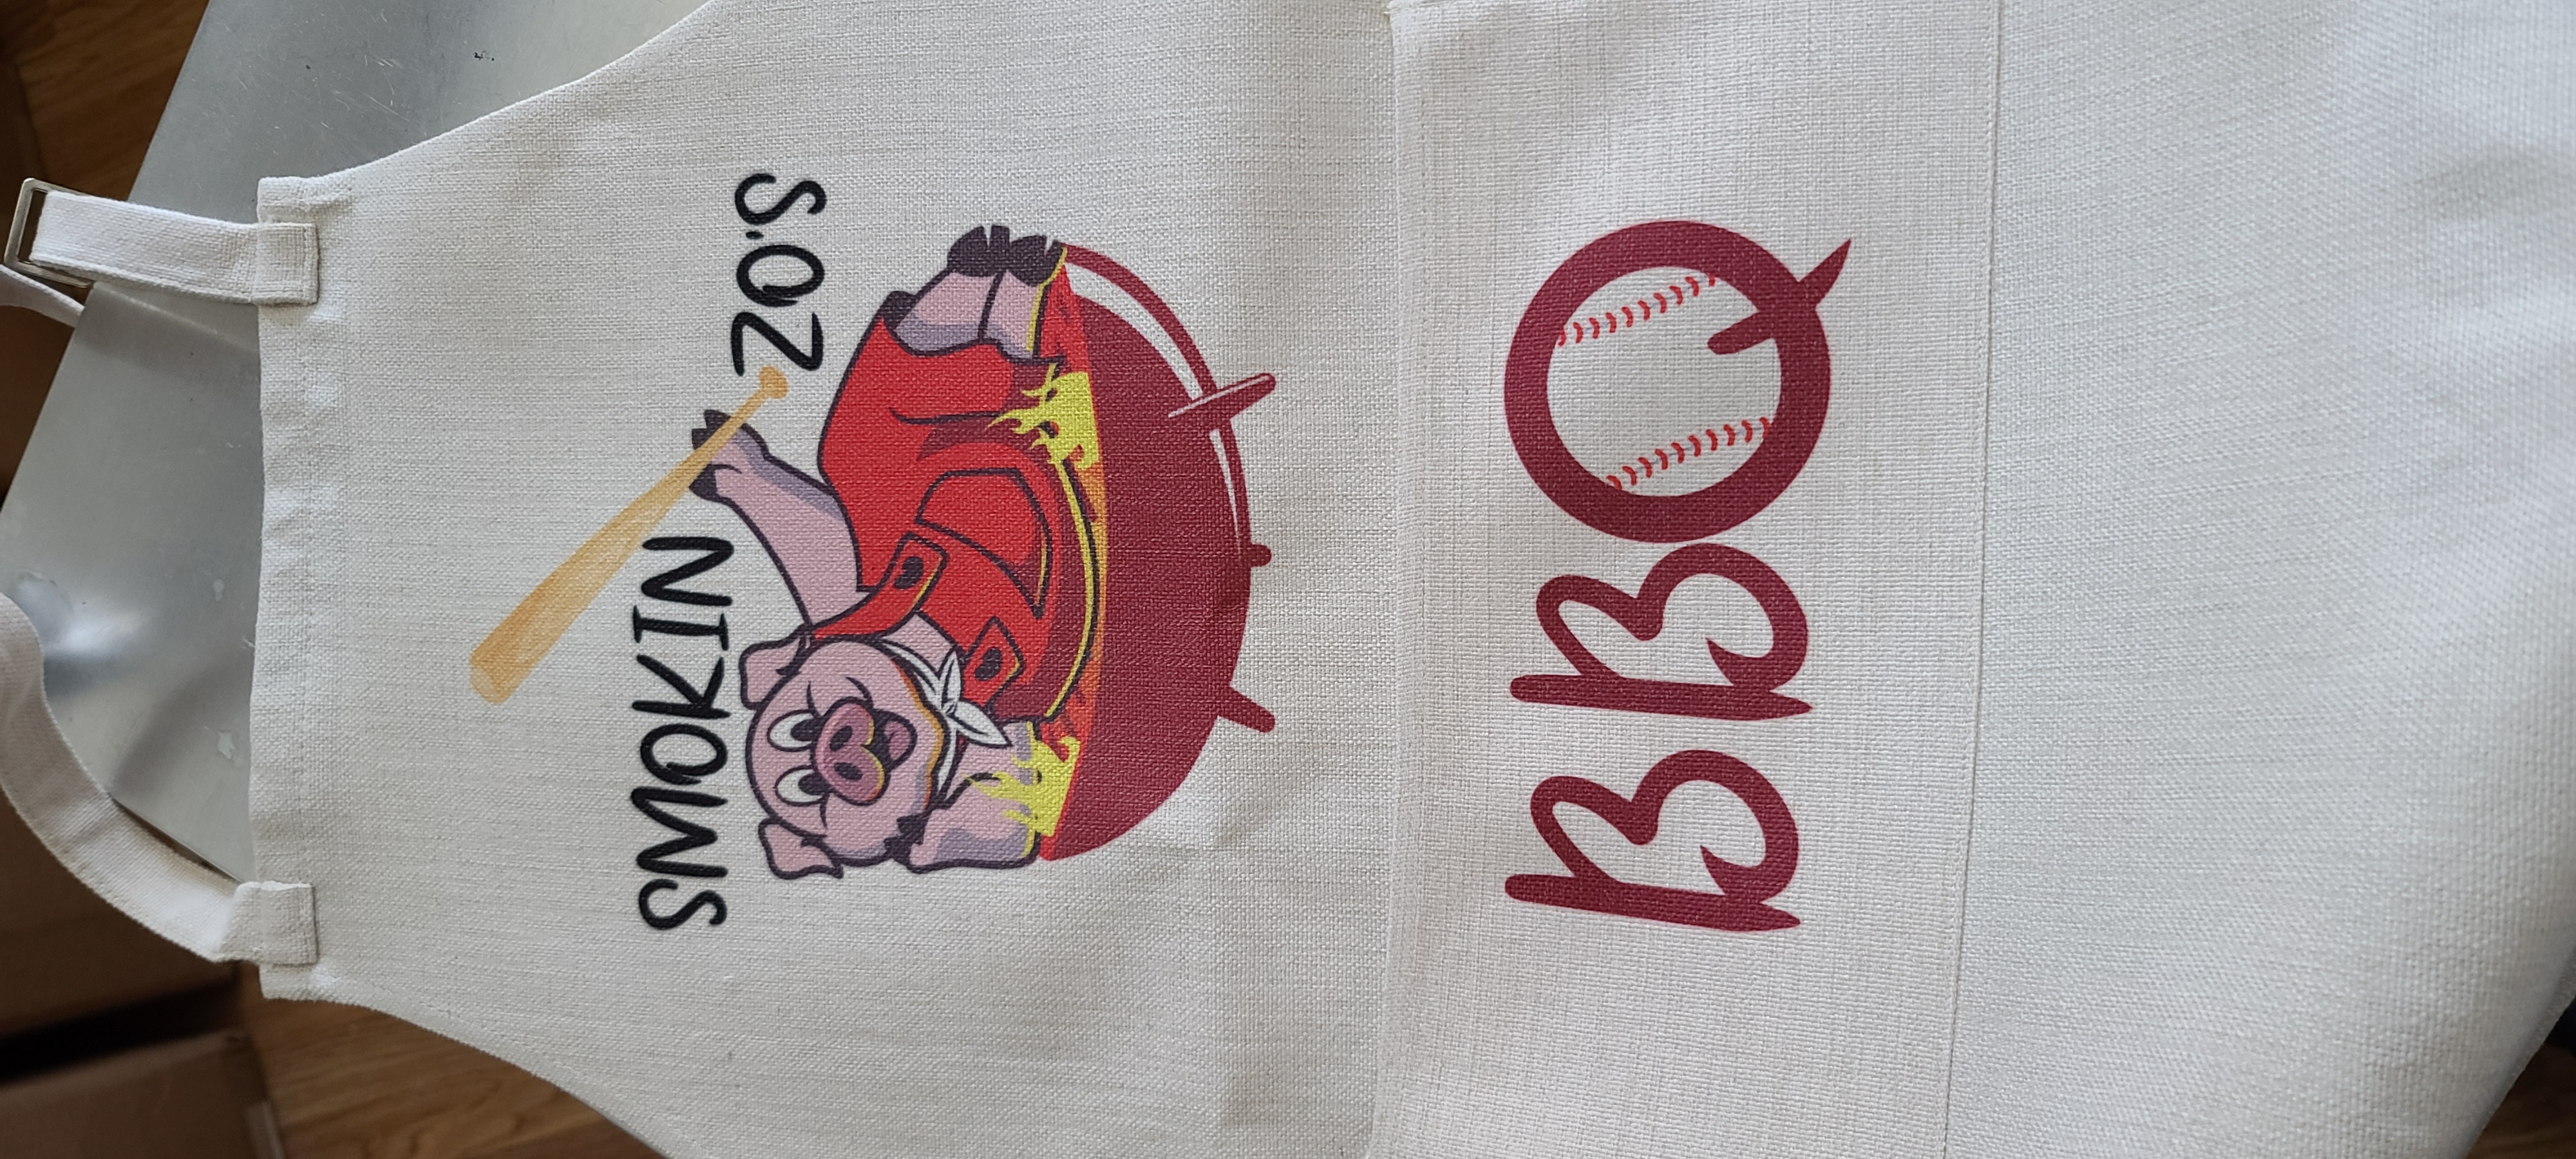 Zo's BBQ Apron made with sublimation printing